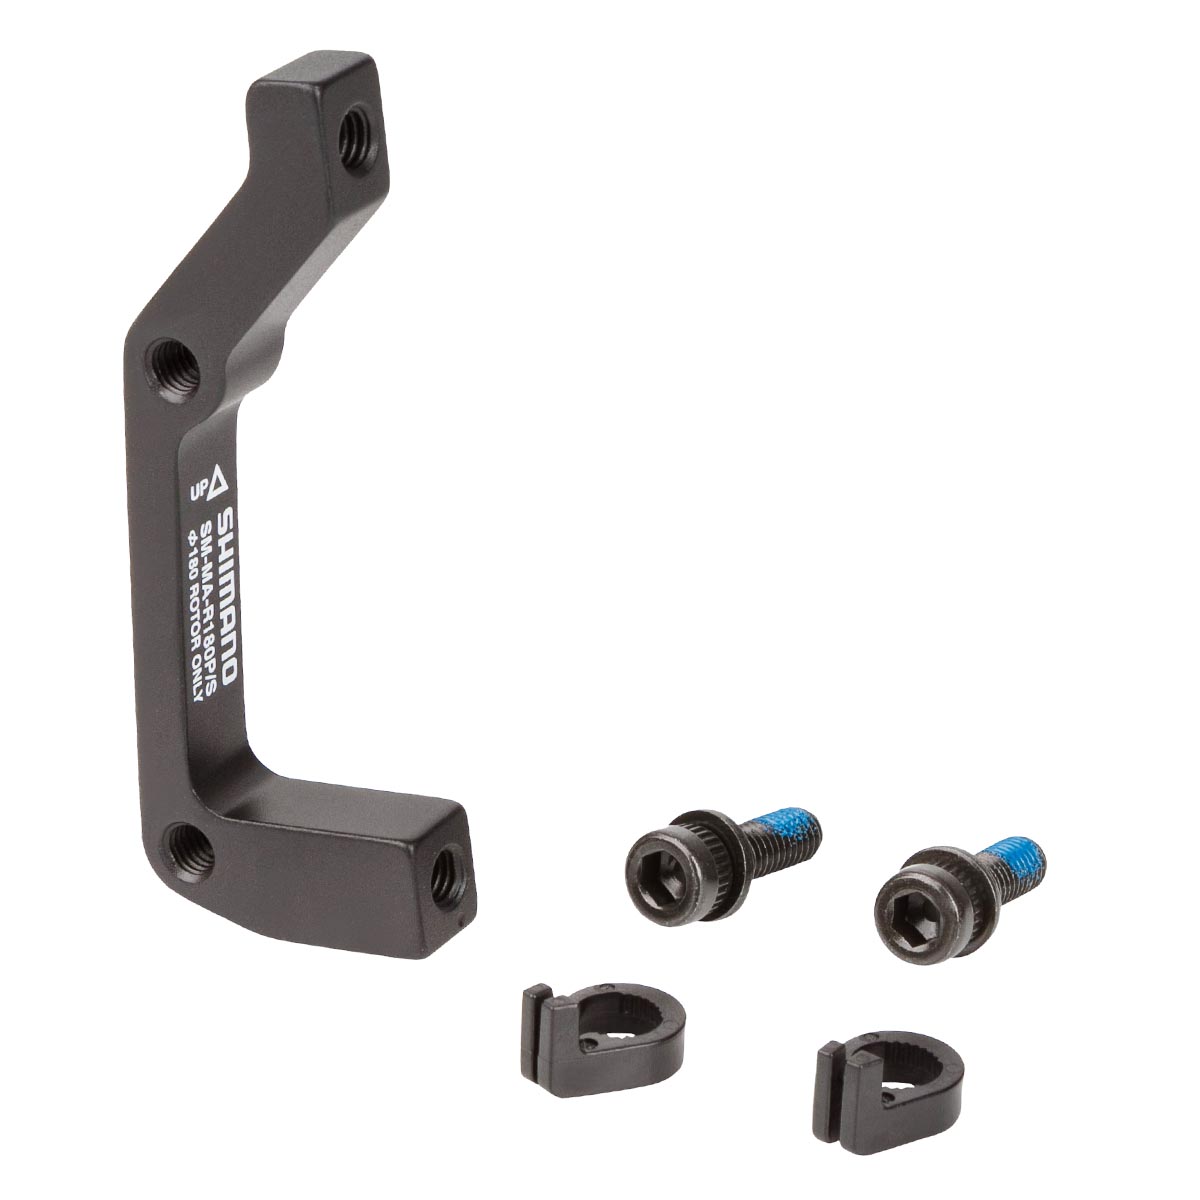 Shimano Adapter  Rear, for PM-Brake/IS-Frame, for 180mm